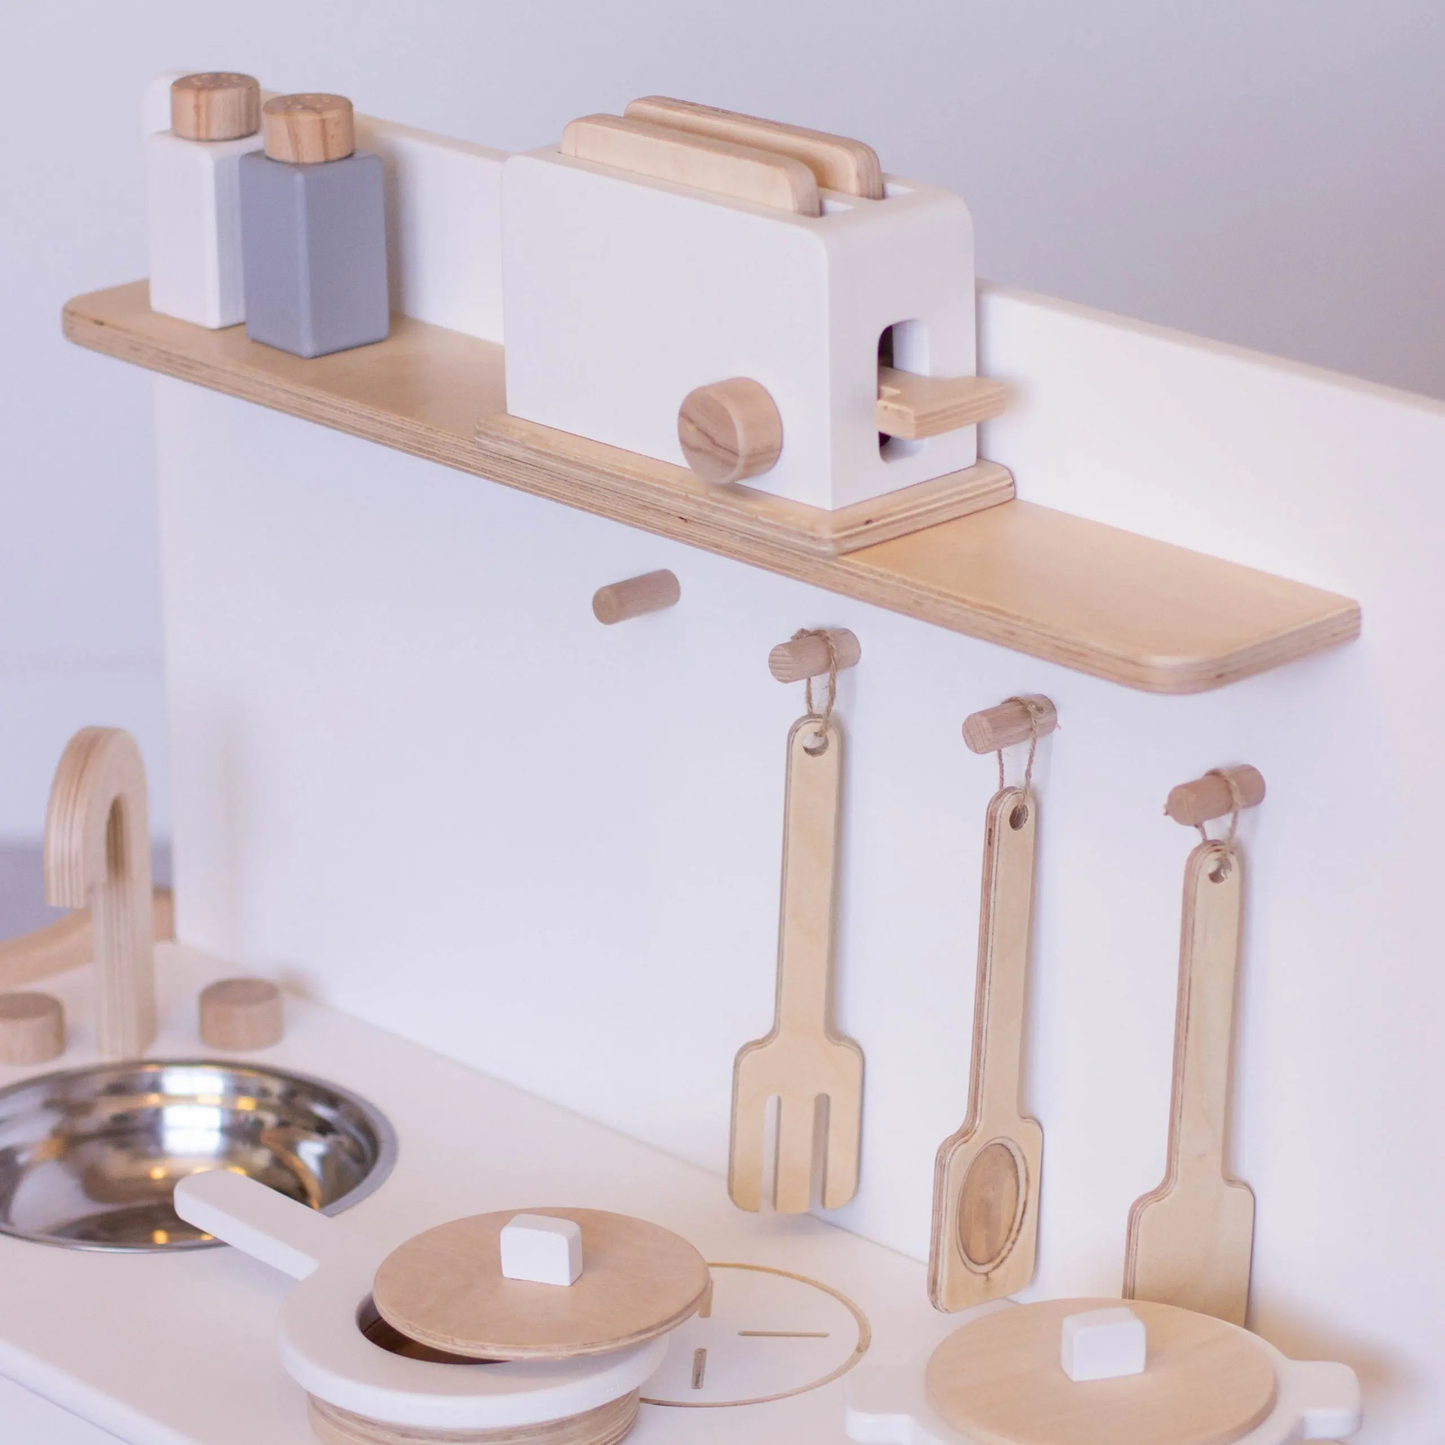 Toy kitchen combined with small shelving